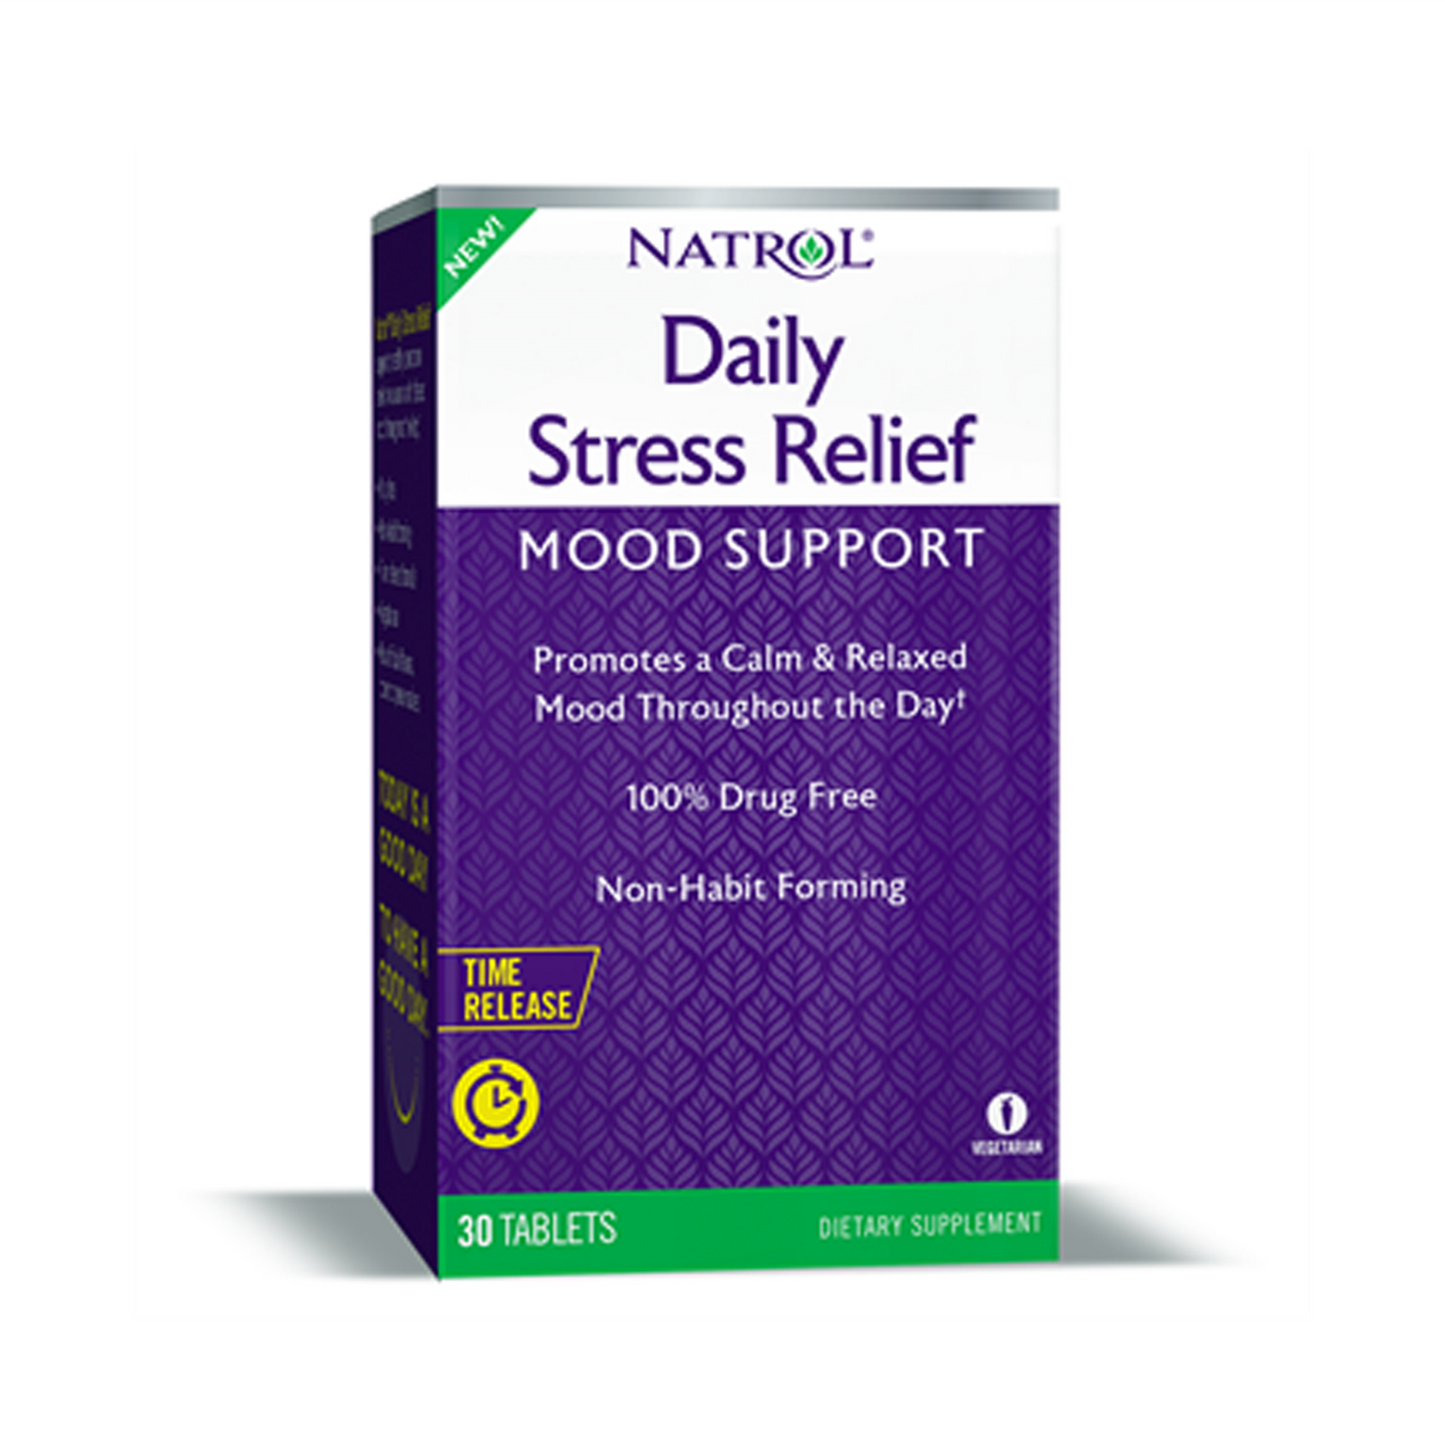 Natrol Daily Stress Relief Mood Support Time Release 30 Tablets